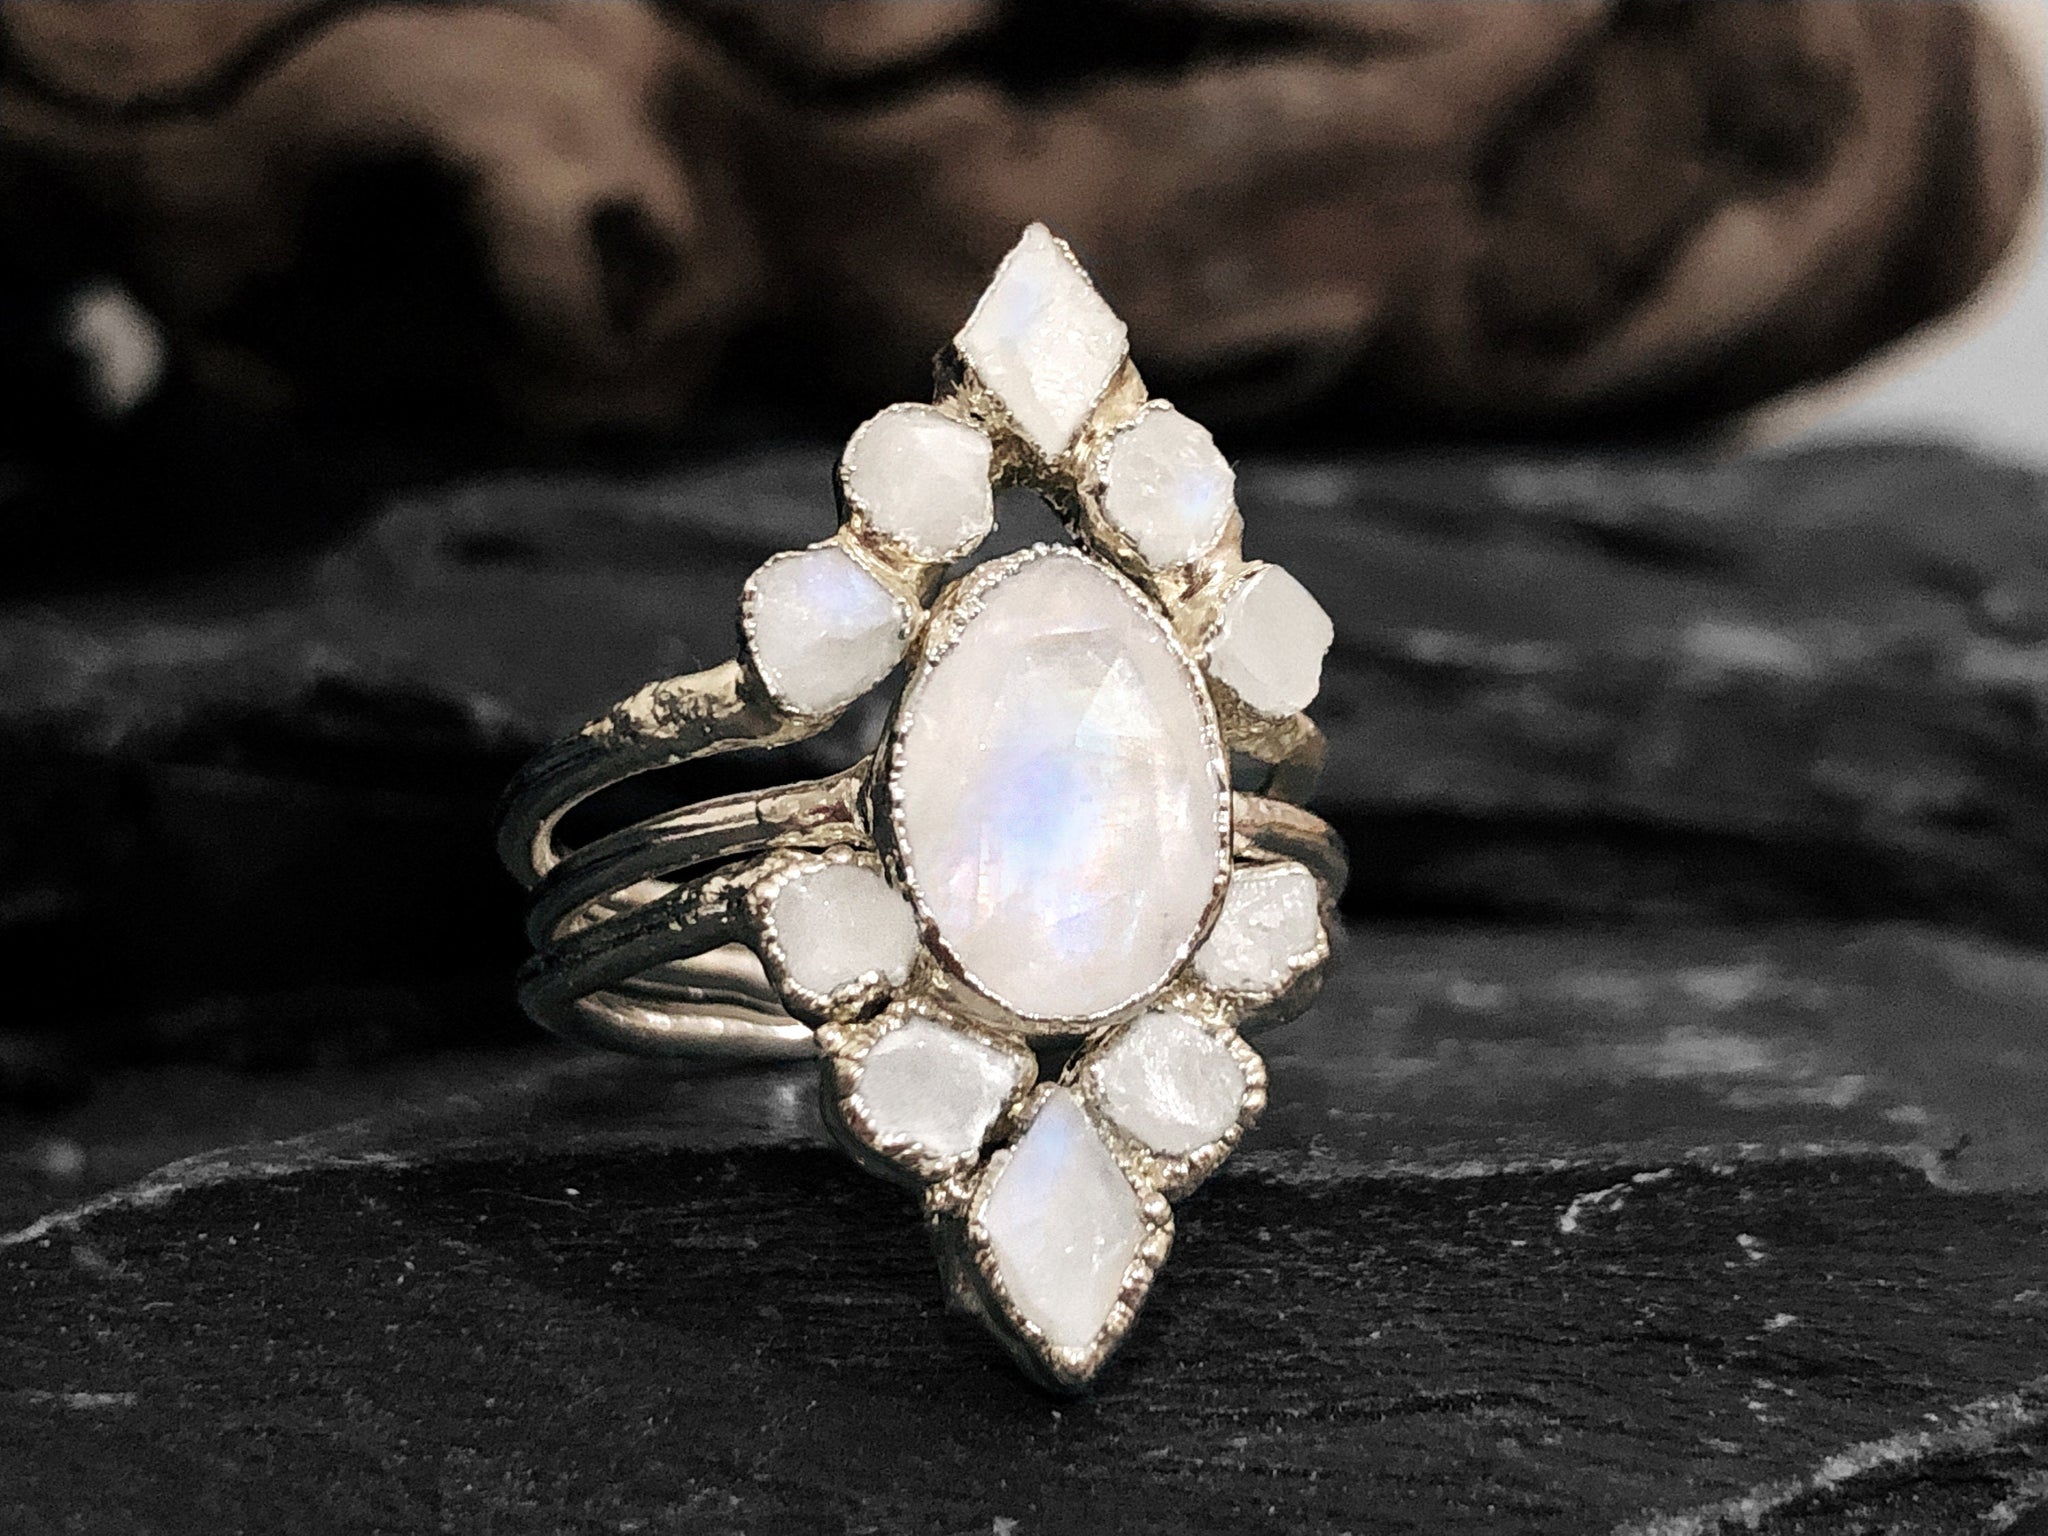 A.M. Thorne Triple Rainbow Moonstone Ring - At Present